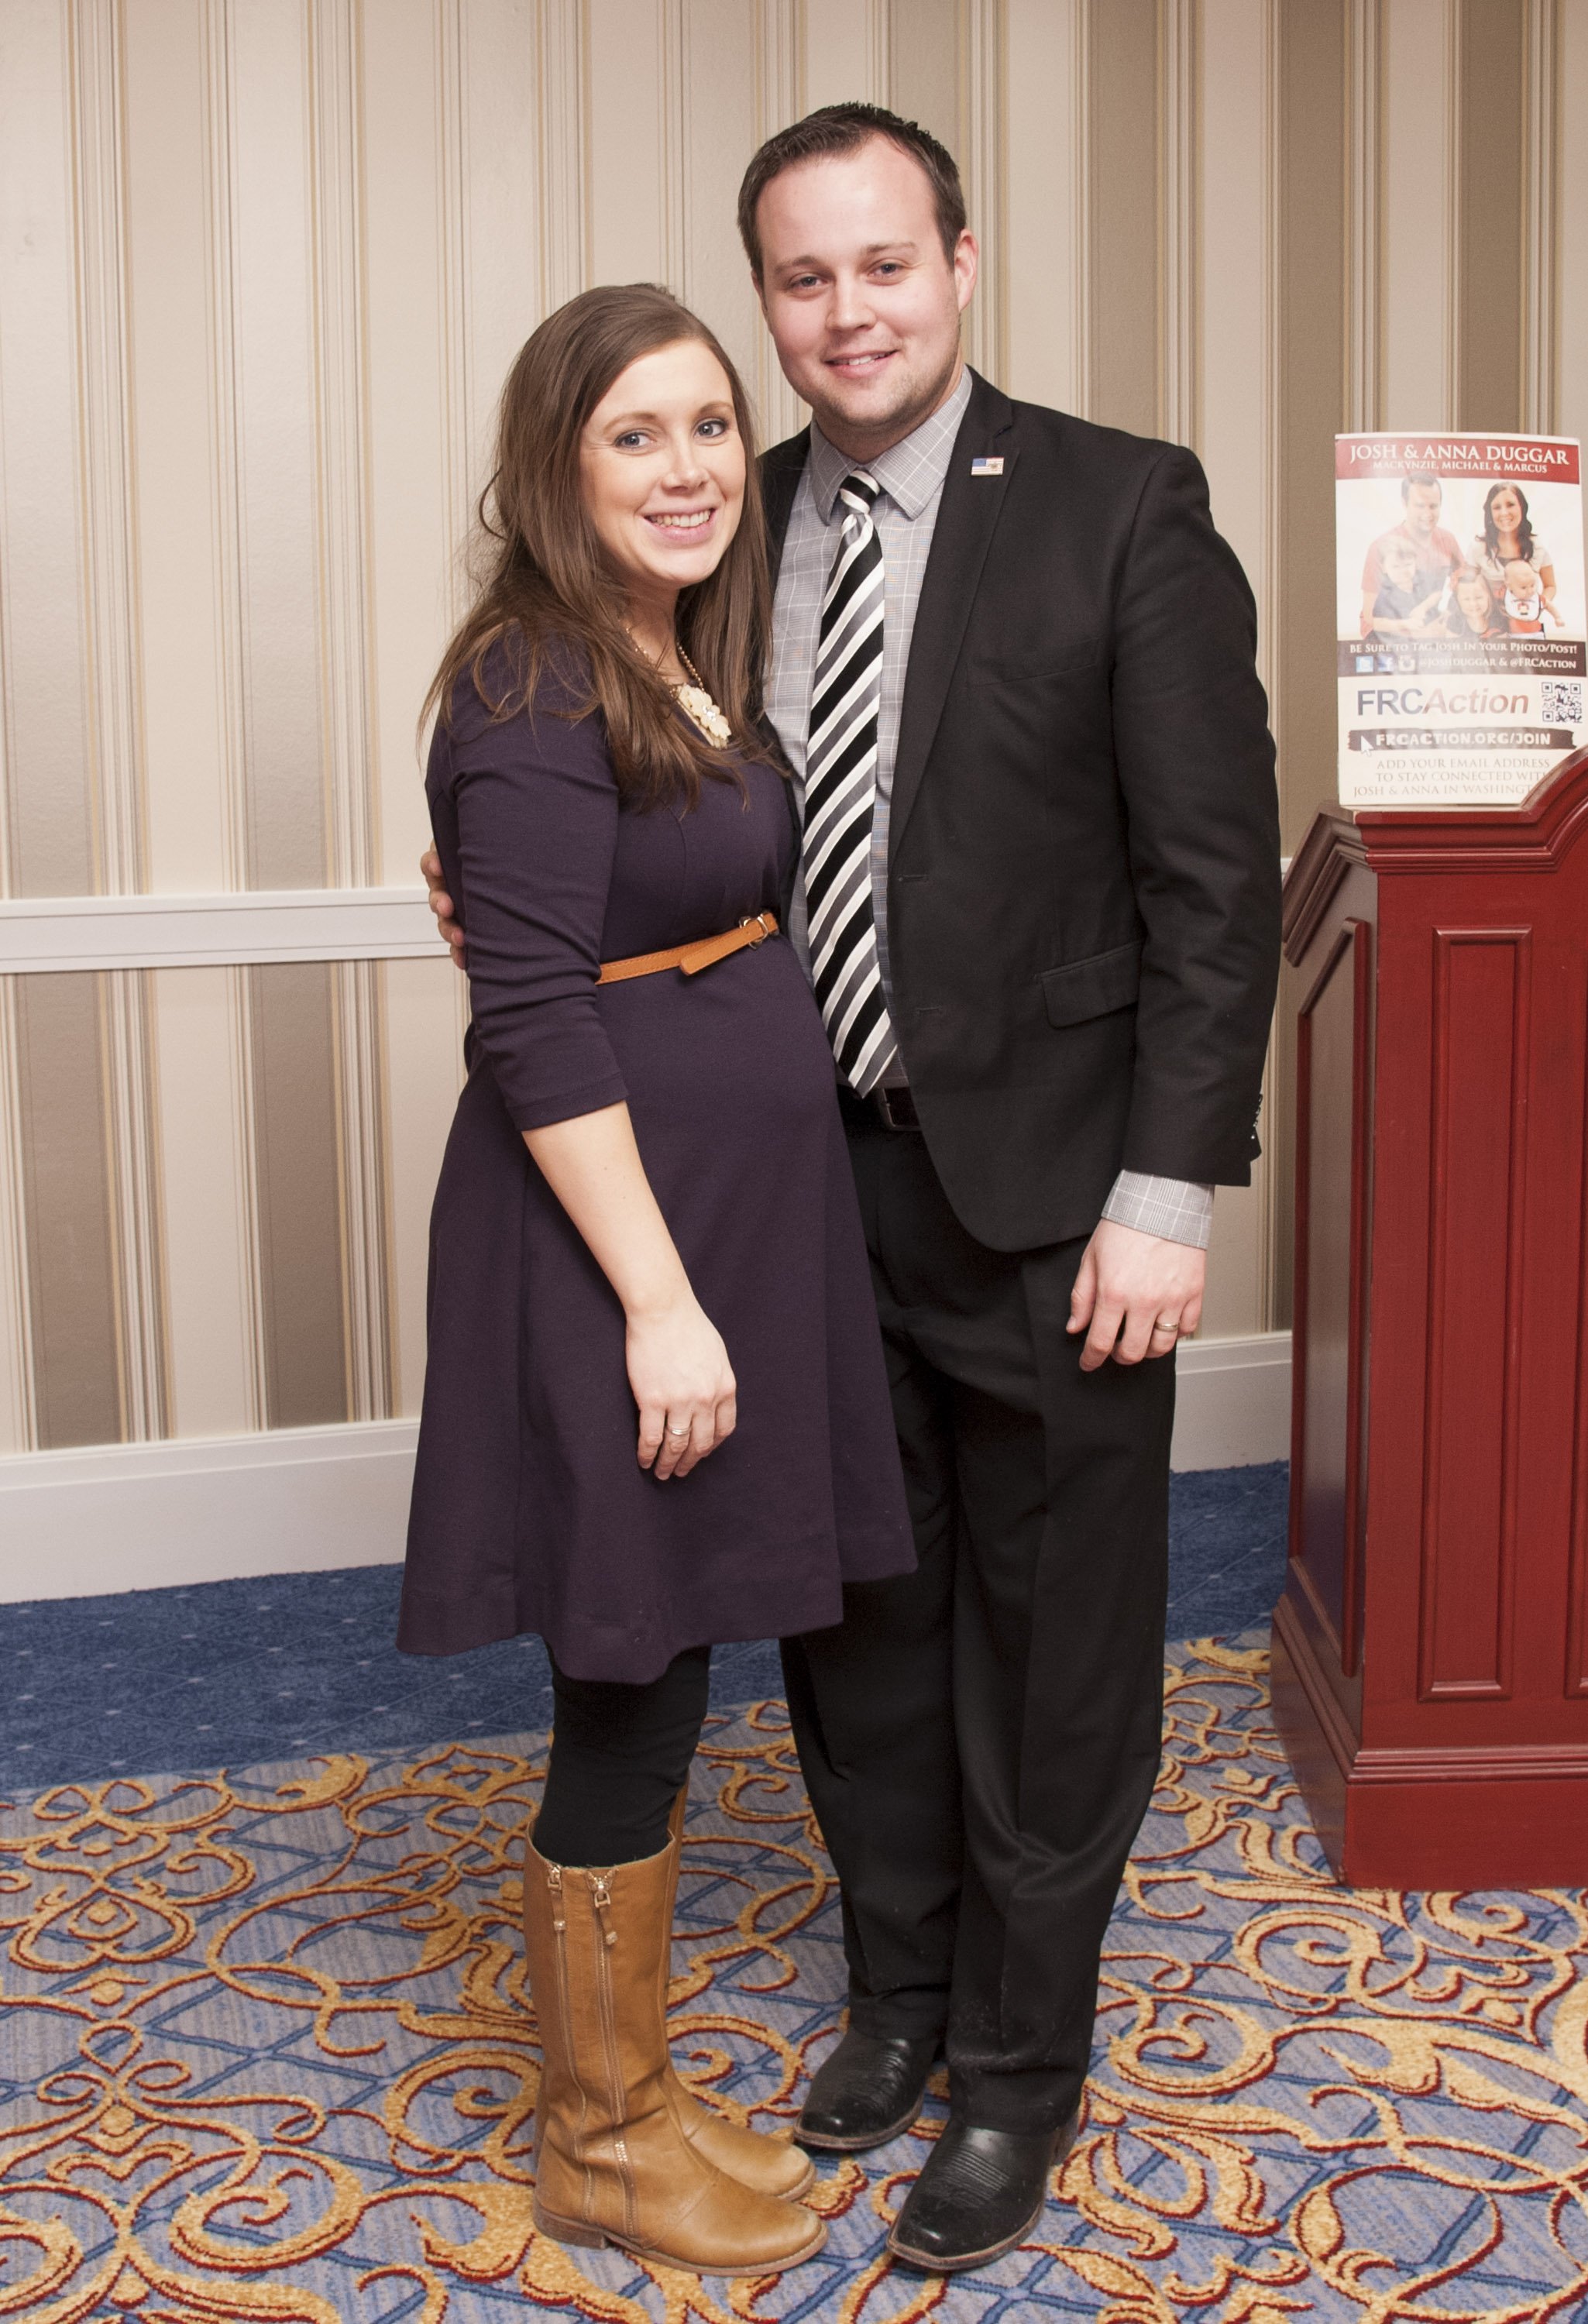 Anna and Josh Duggar pictured at the 42nd annual Conservative Political Action Conference, 2015, Maryland. | Photo: Getty Images